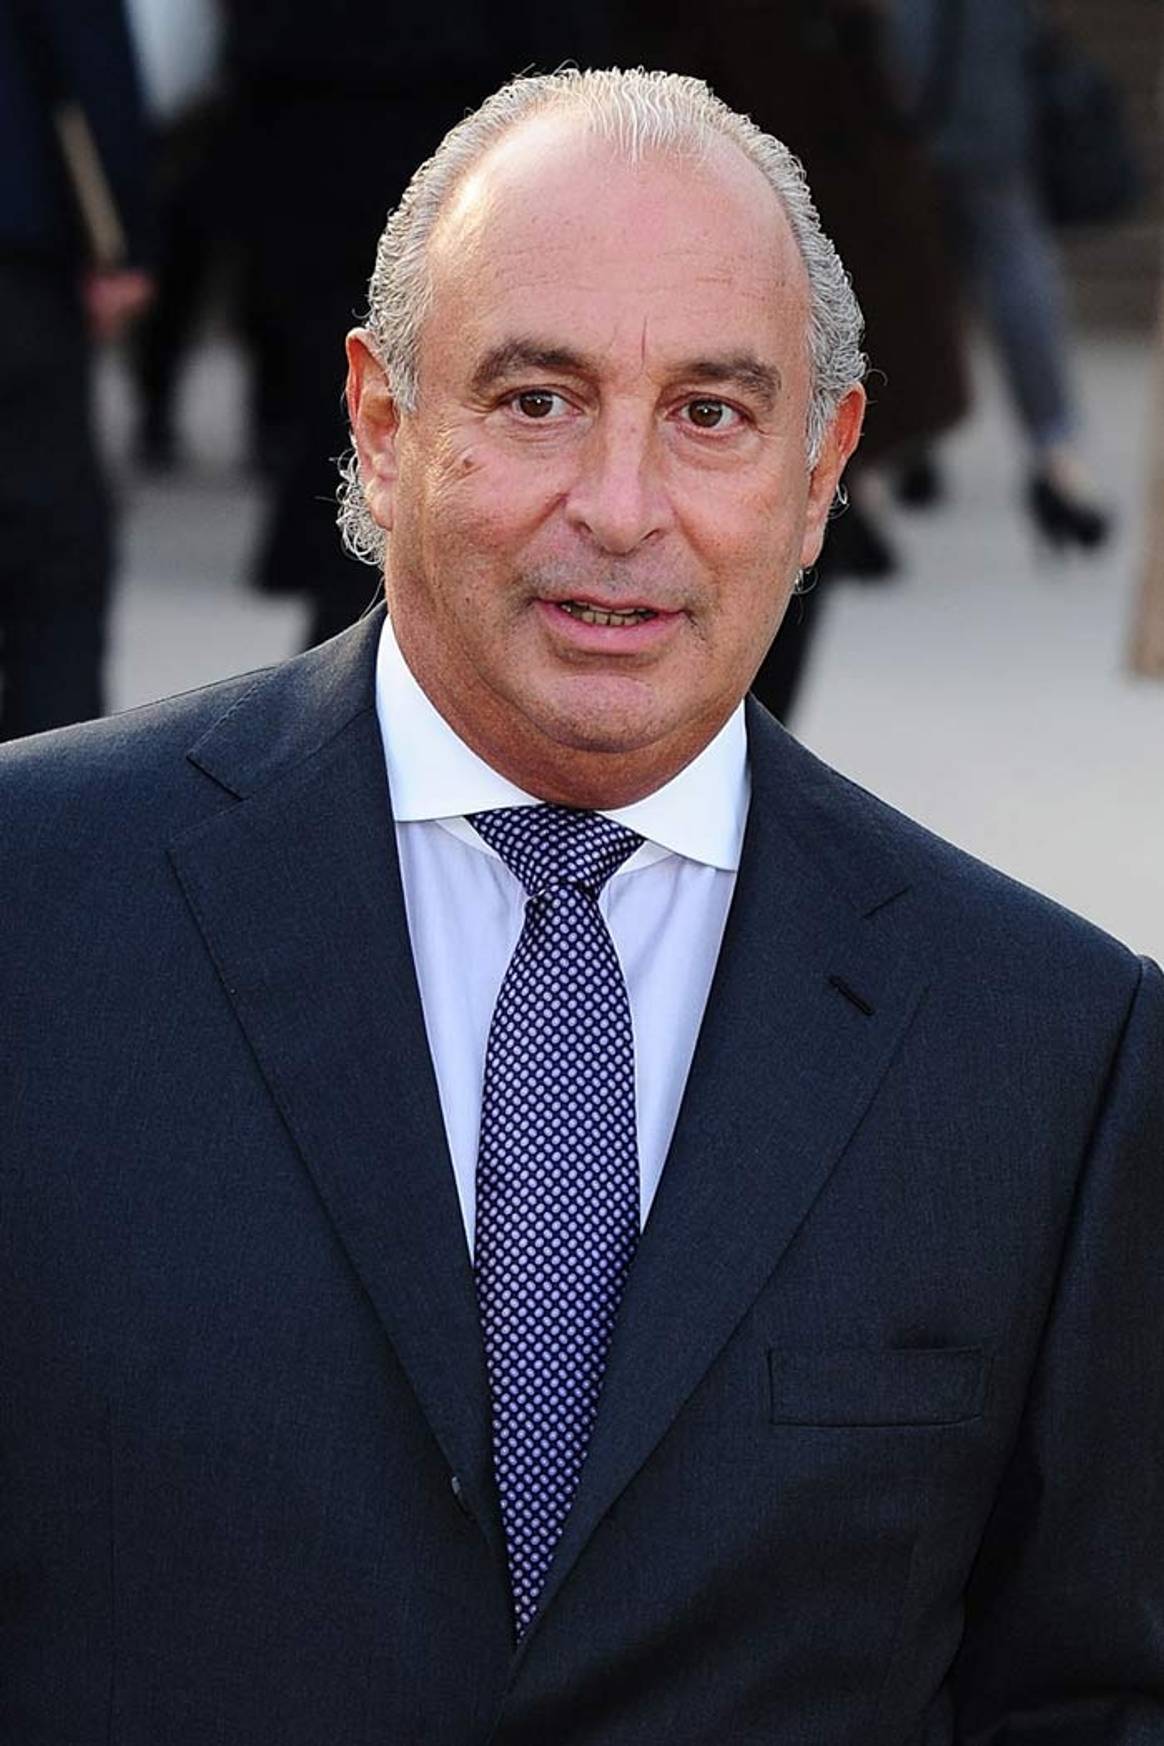 Sir Philip Green offloads Bhs to Retail Acquisitions